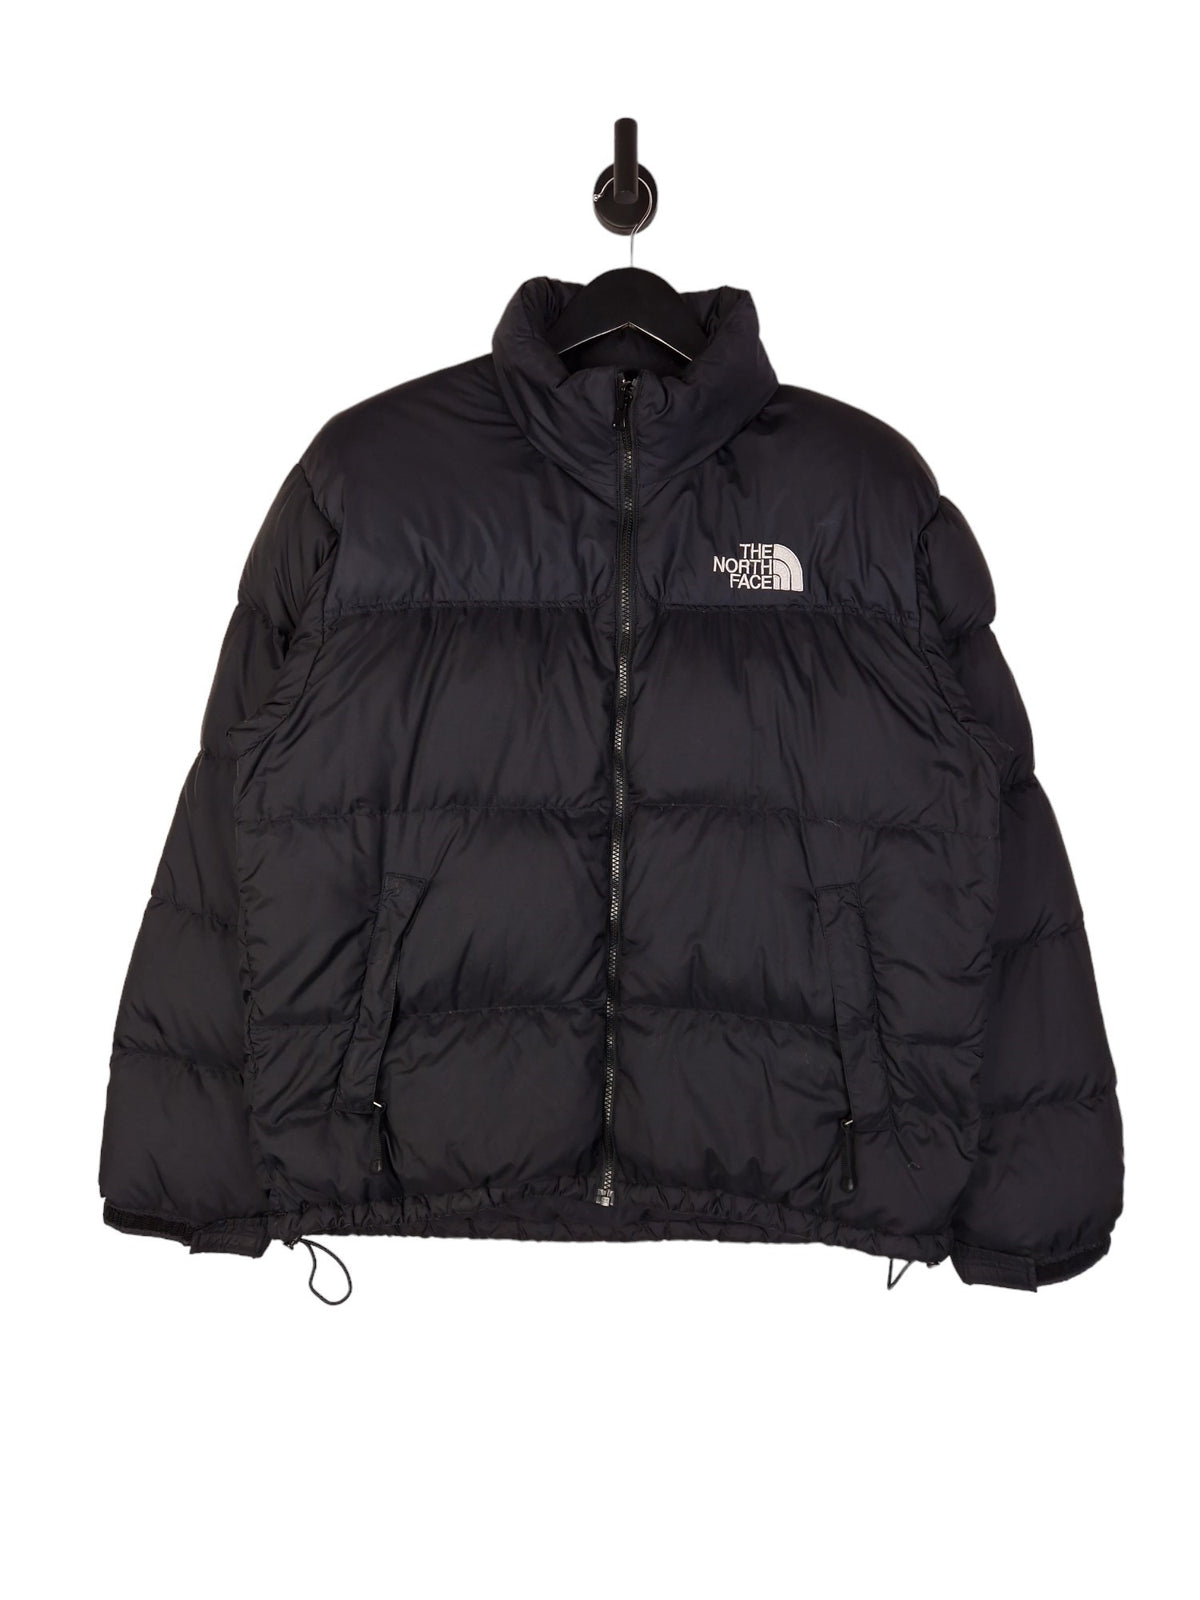 The North Face 700 Nuptse Puffer Jacket - Size  Large